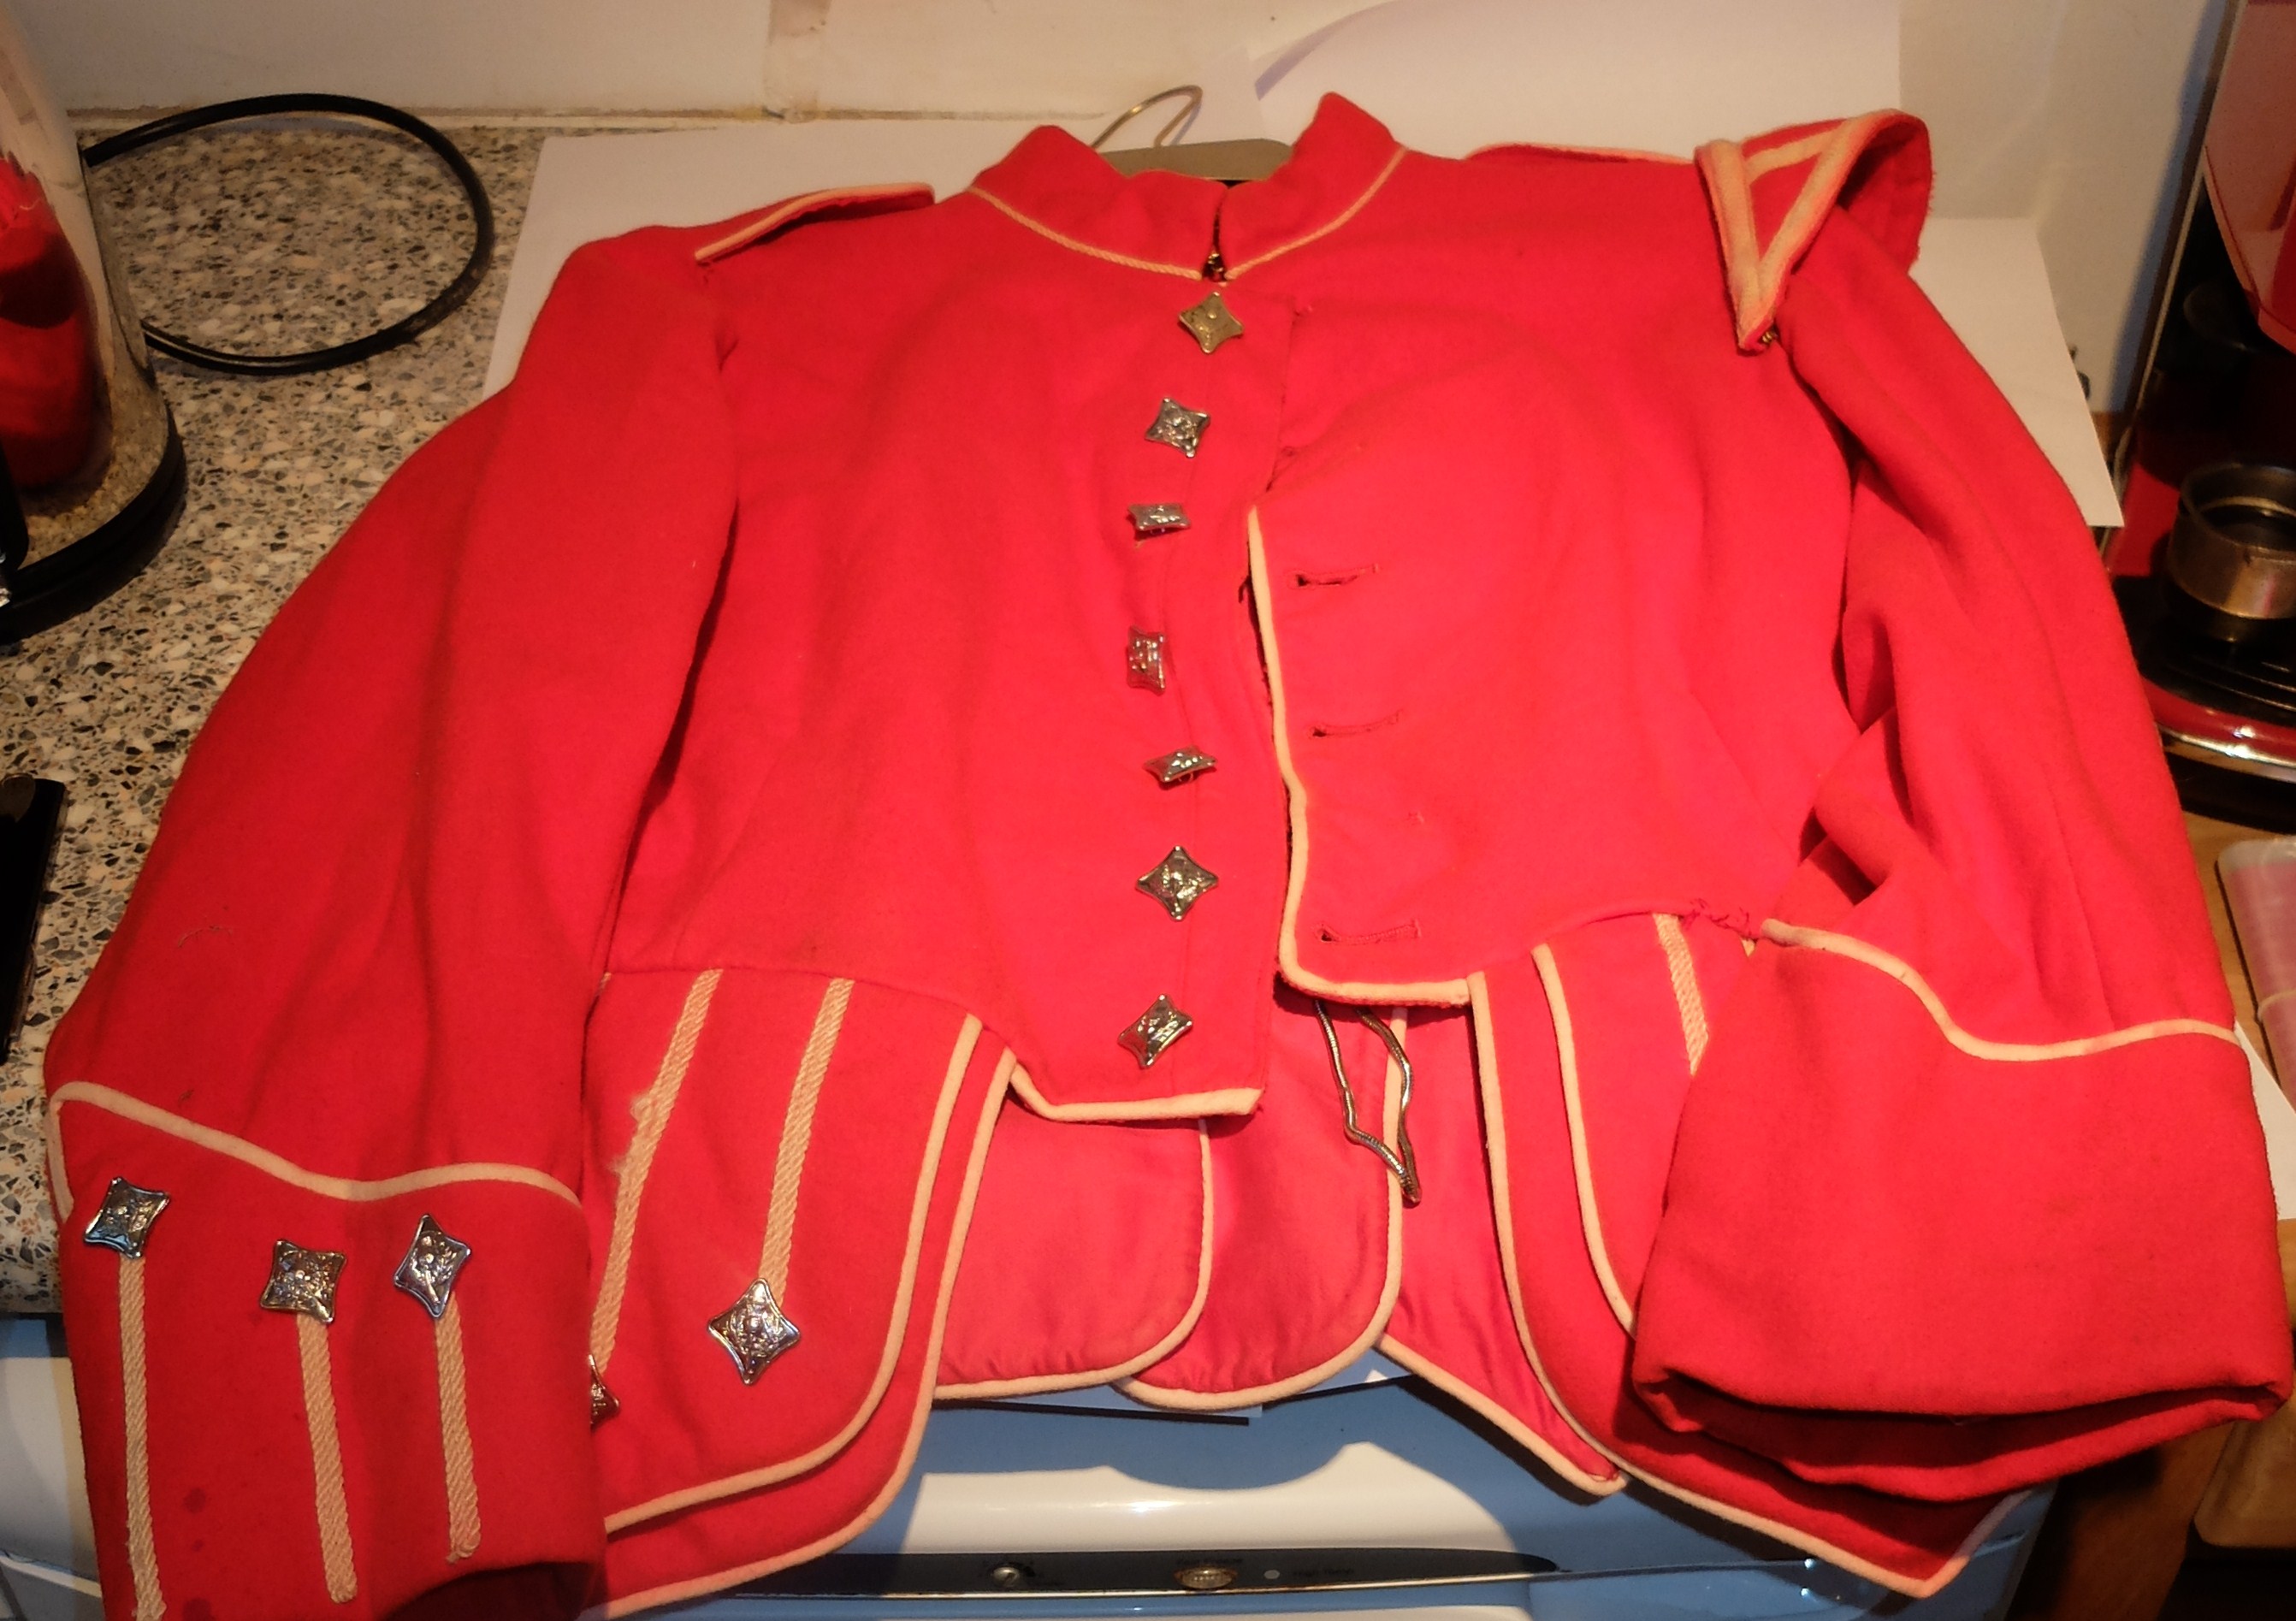 Sale Item:    VINTAGE ARMY TUNIC   Vat Status:   No Vat   Buyers Premium:  This lot is subject to a